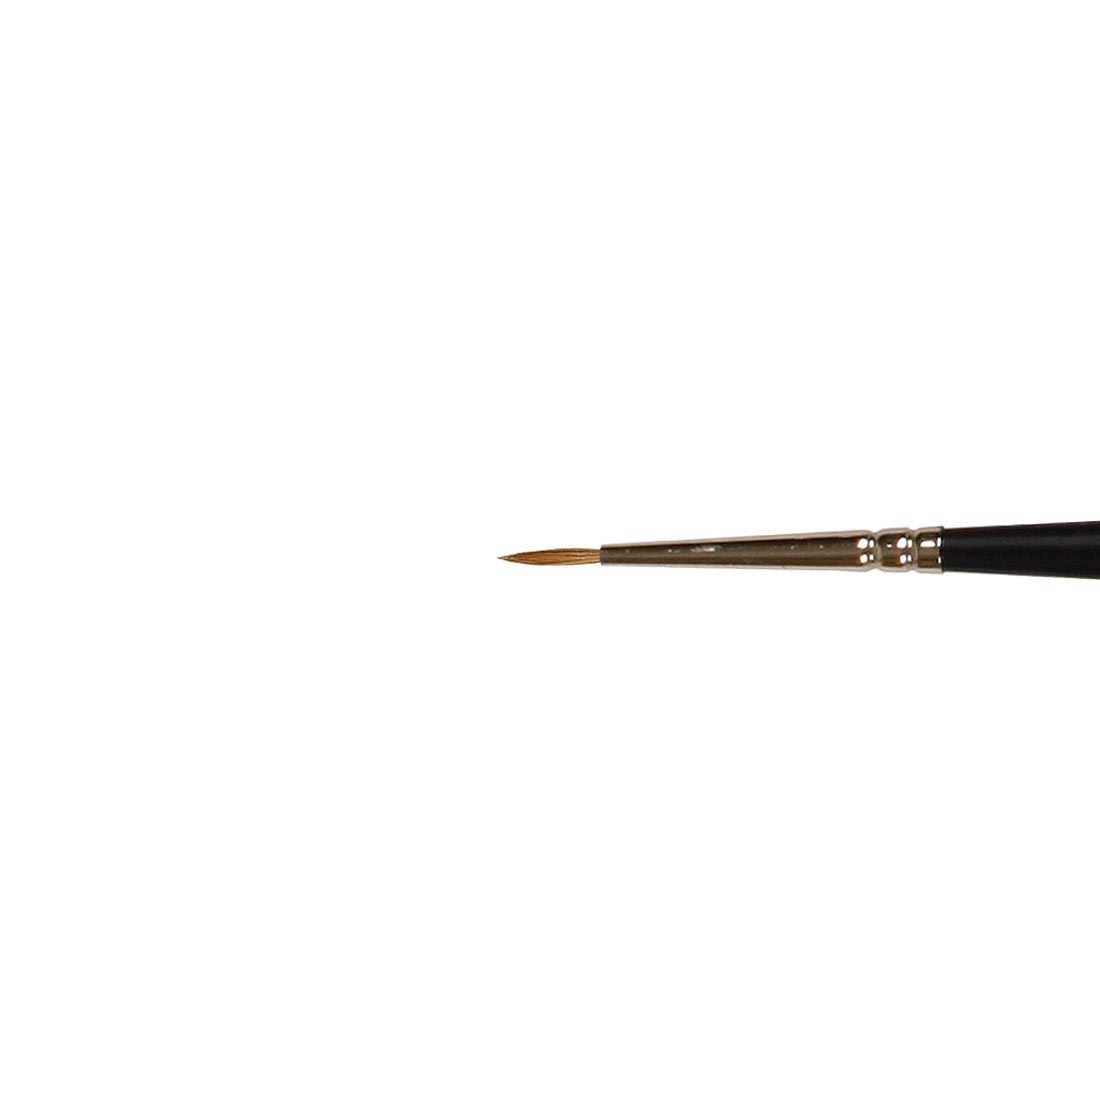 Winsor & Newton Artists' Water Colour Sable Brush Size 0, close up of brush head